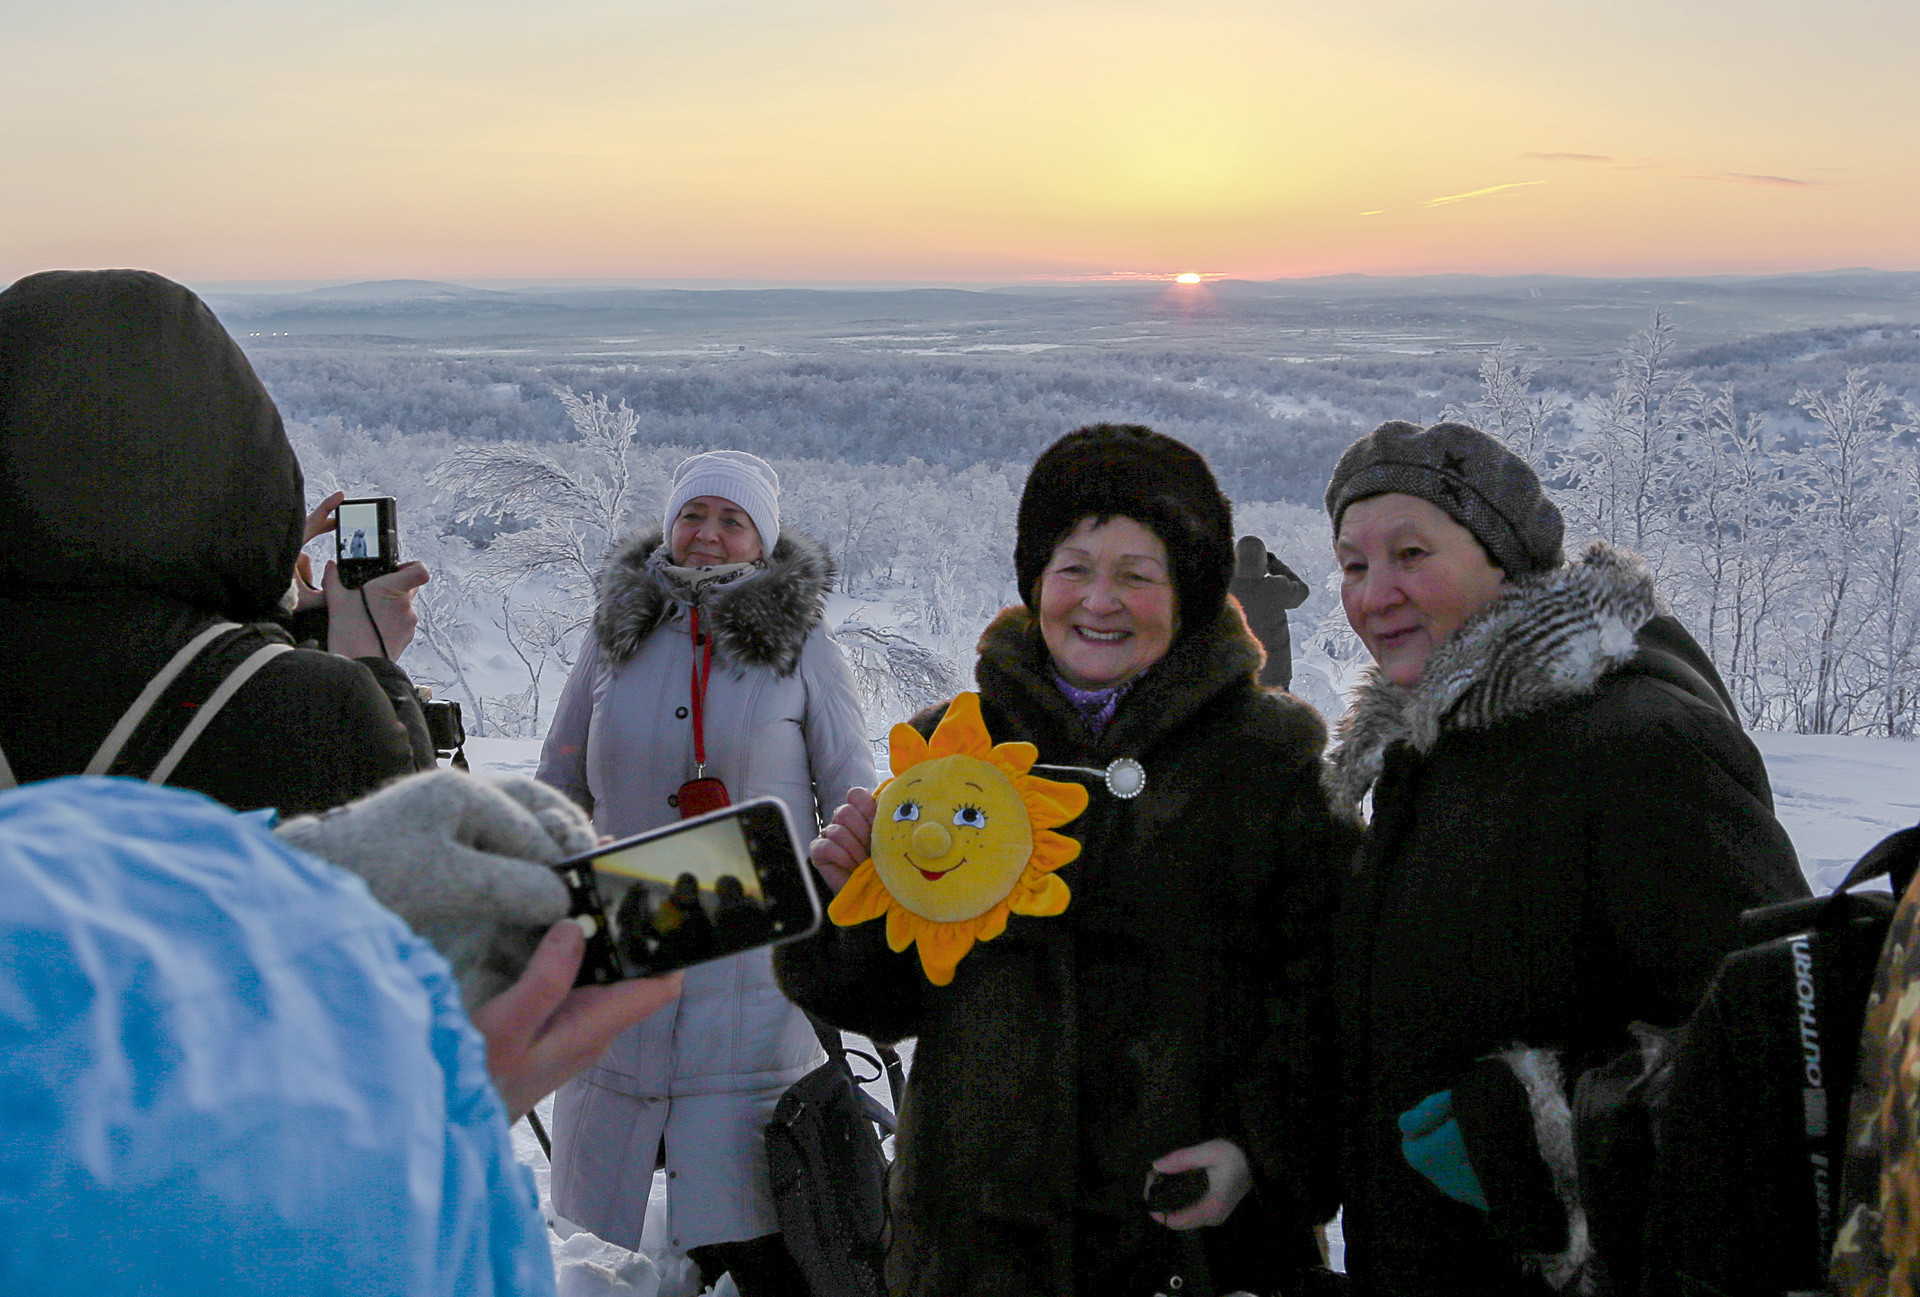 Citizens of Murmansk take pictures at the celebration dedicated to the first dawn of 2018.